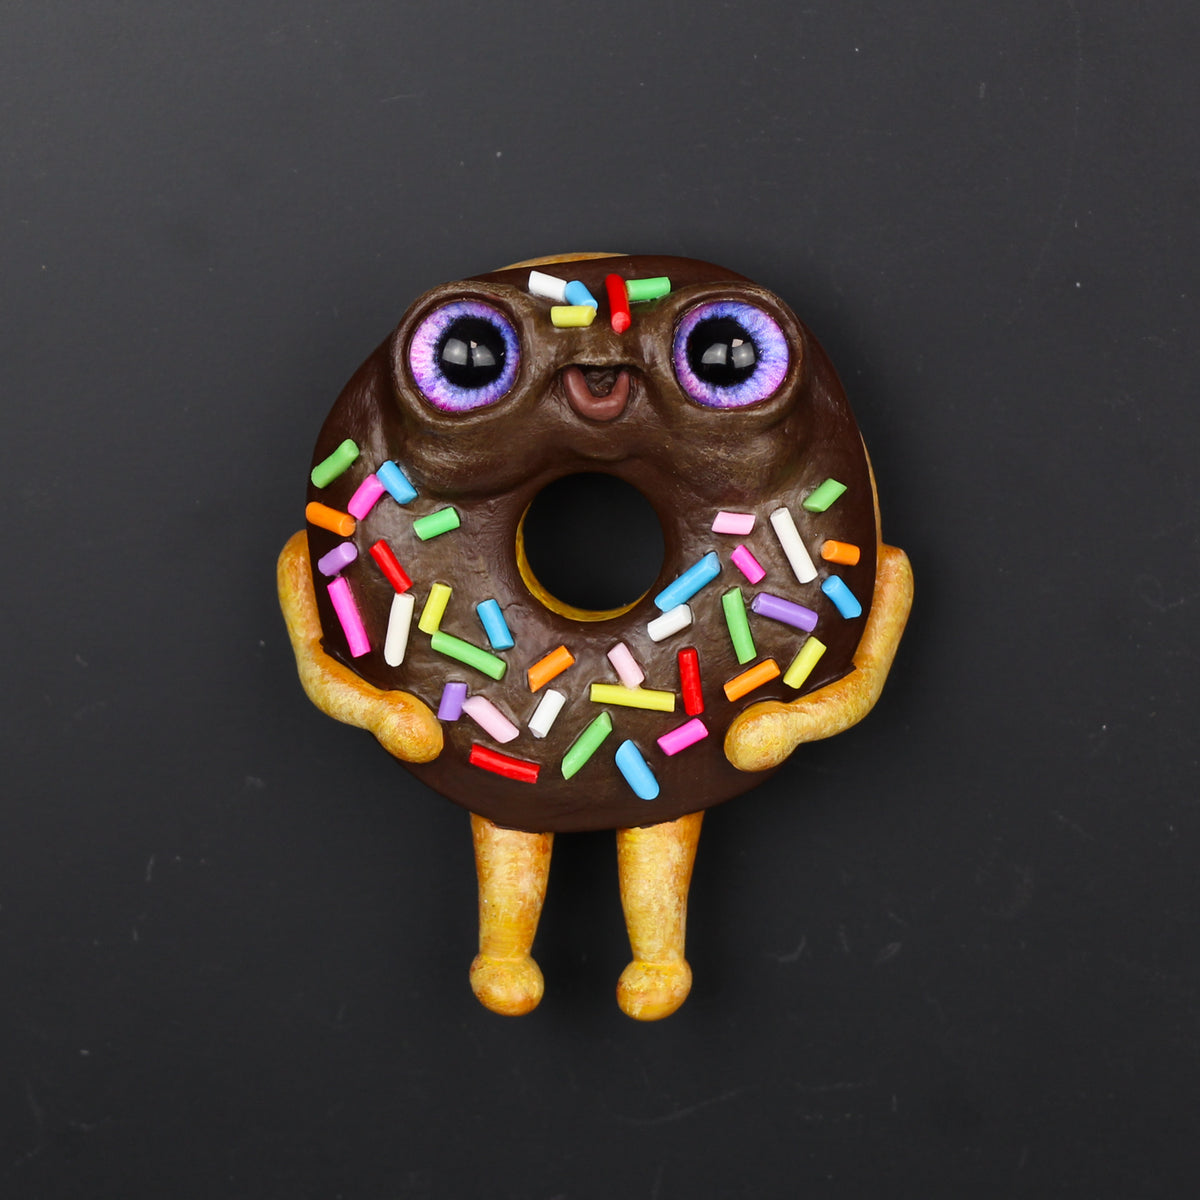 Chocolate Frosted Donut Magnet